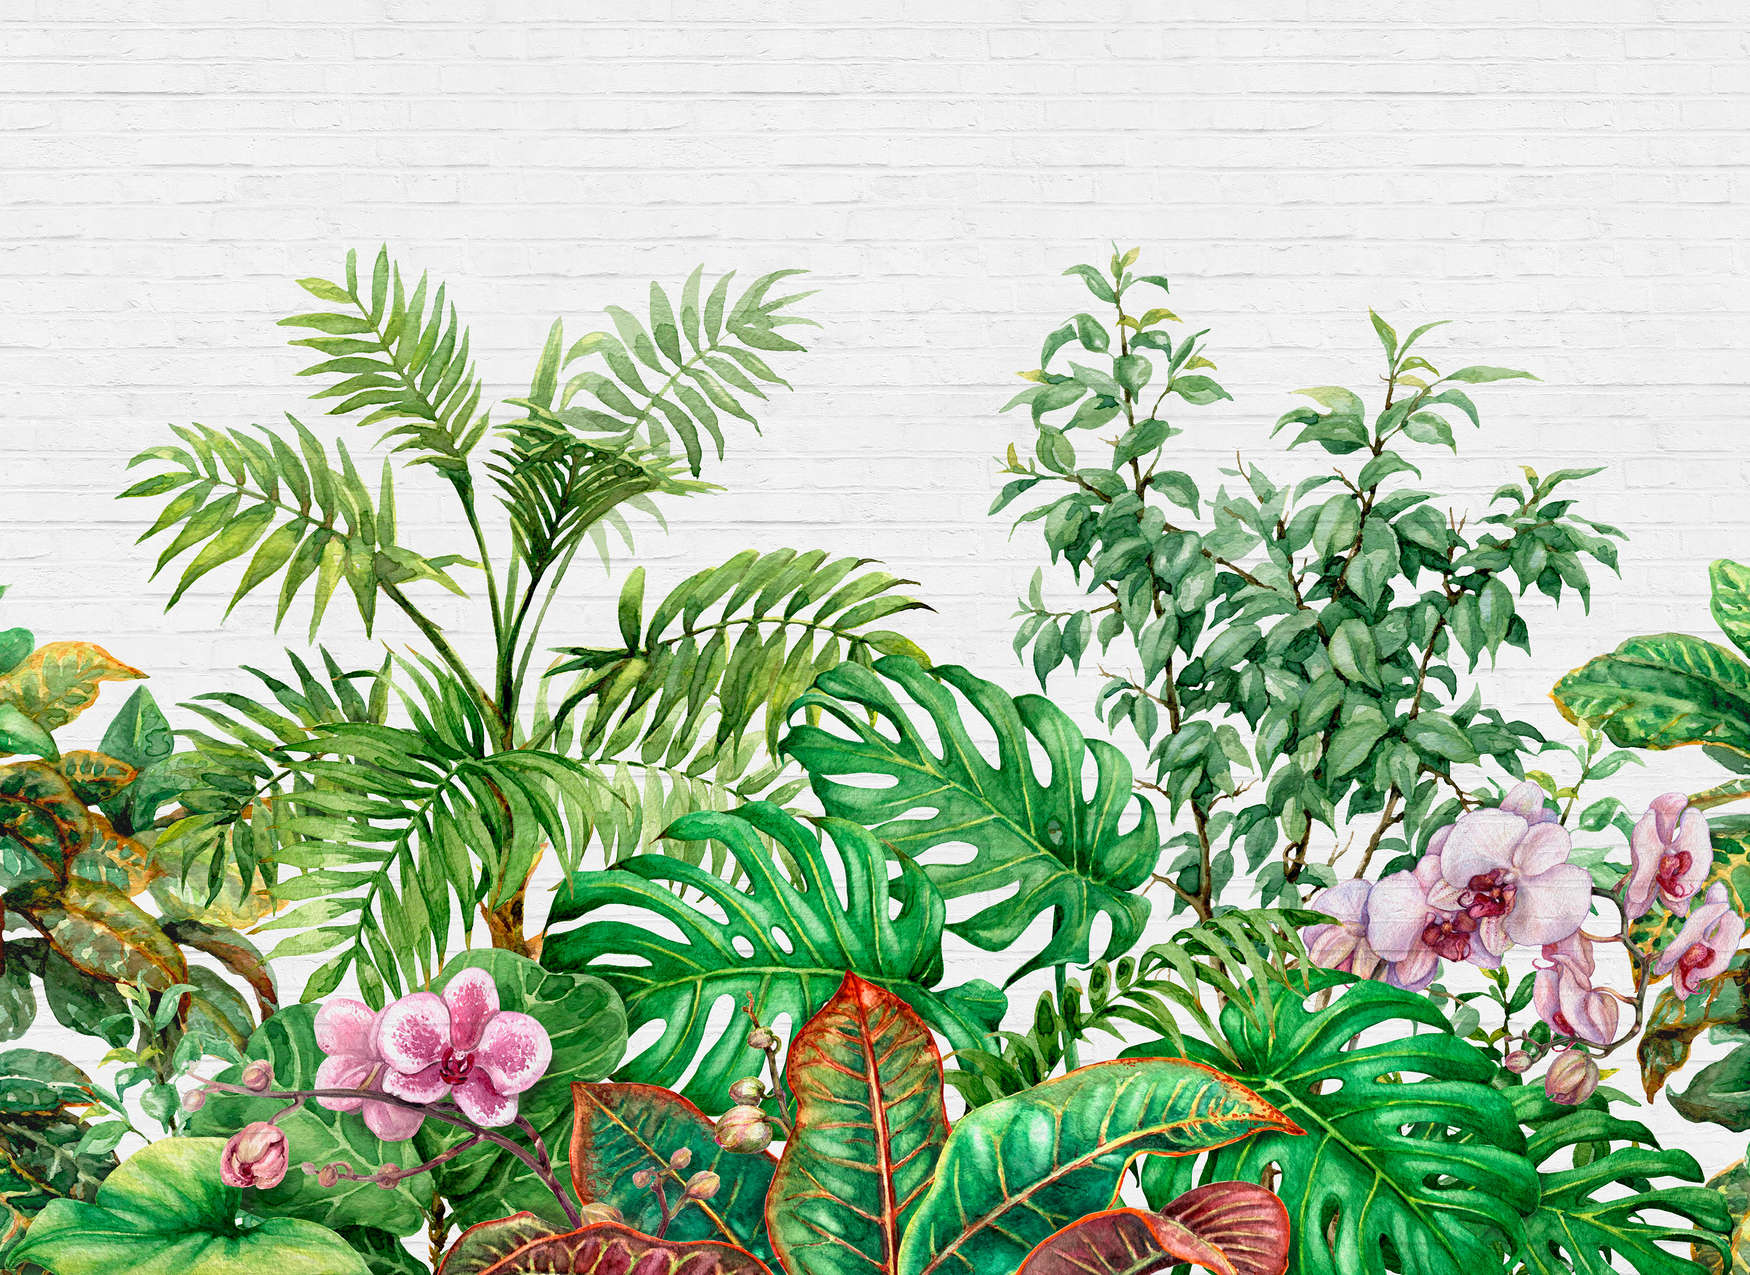             Wall motif with jungle leaves - green, white, pink
        